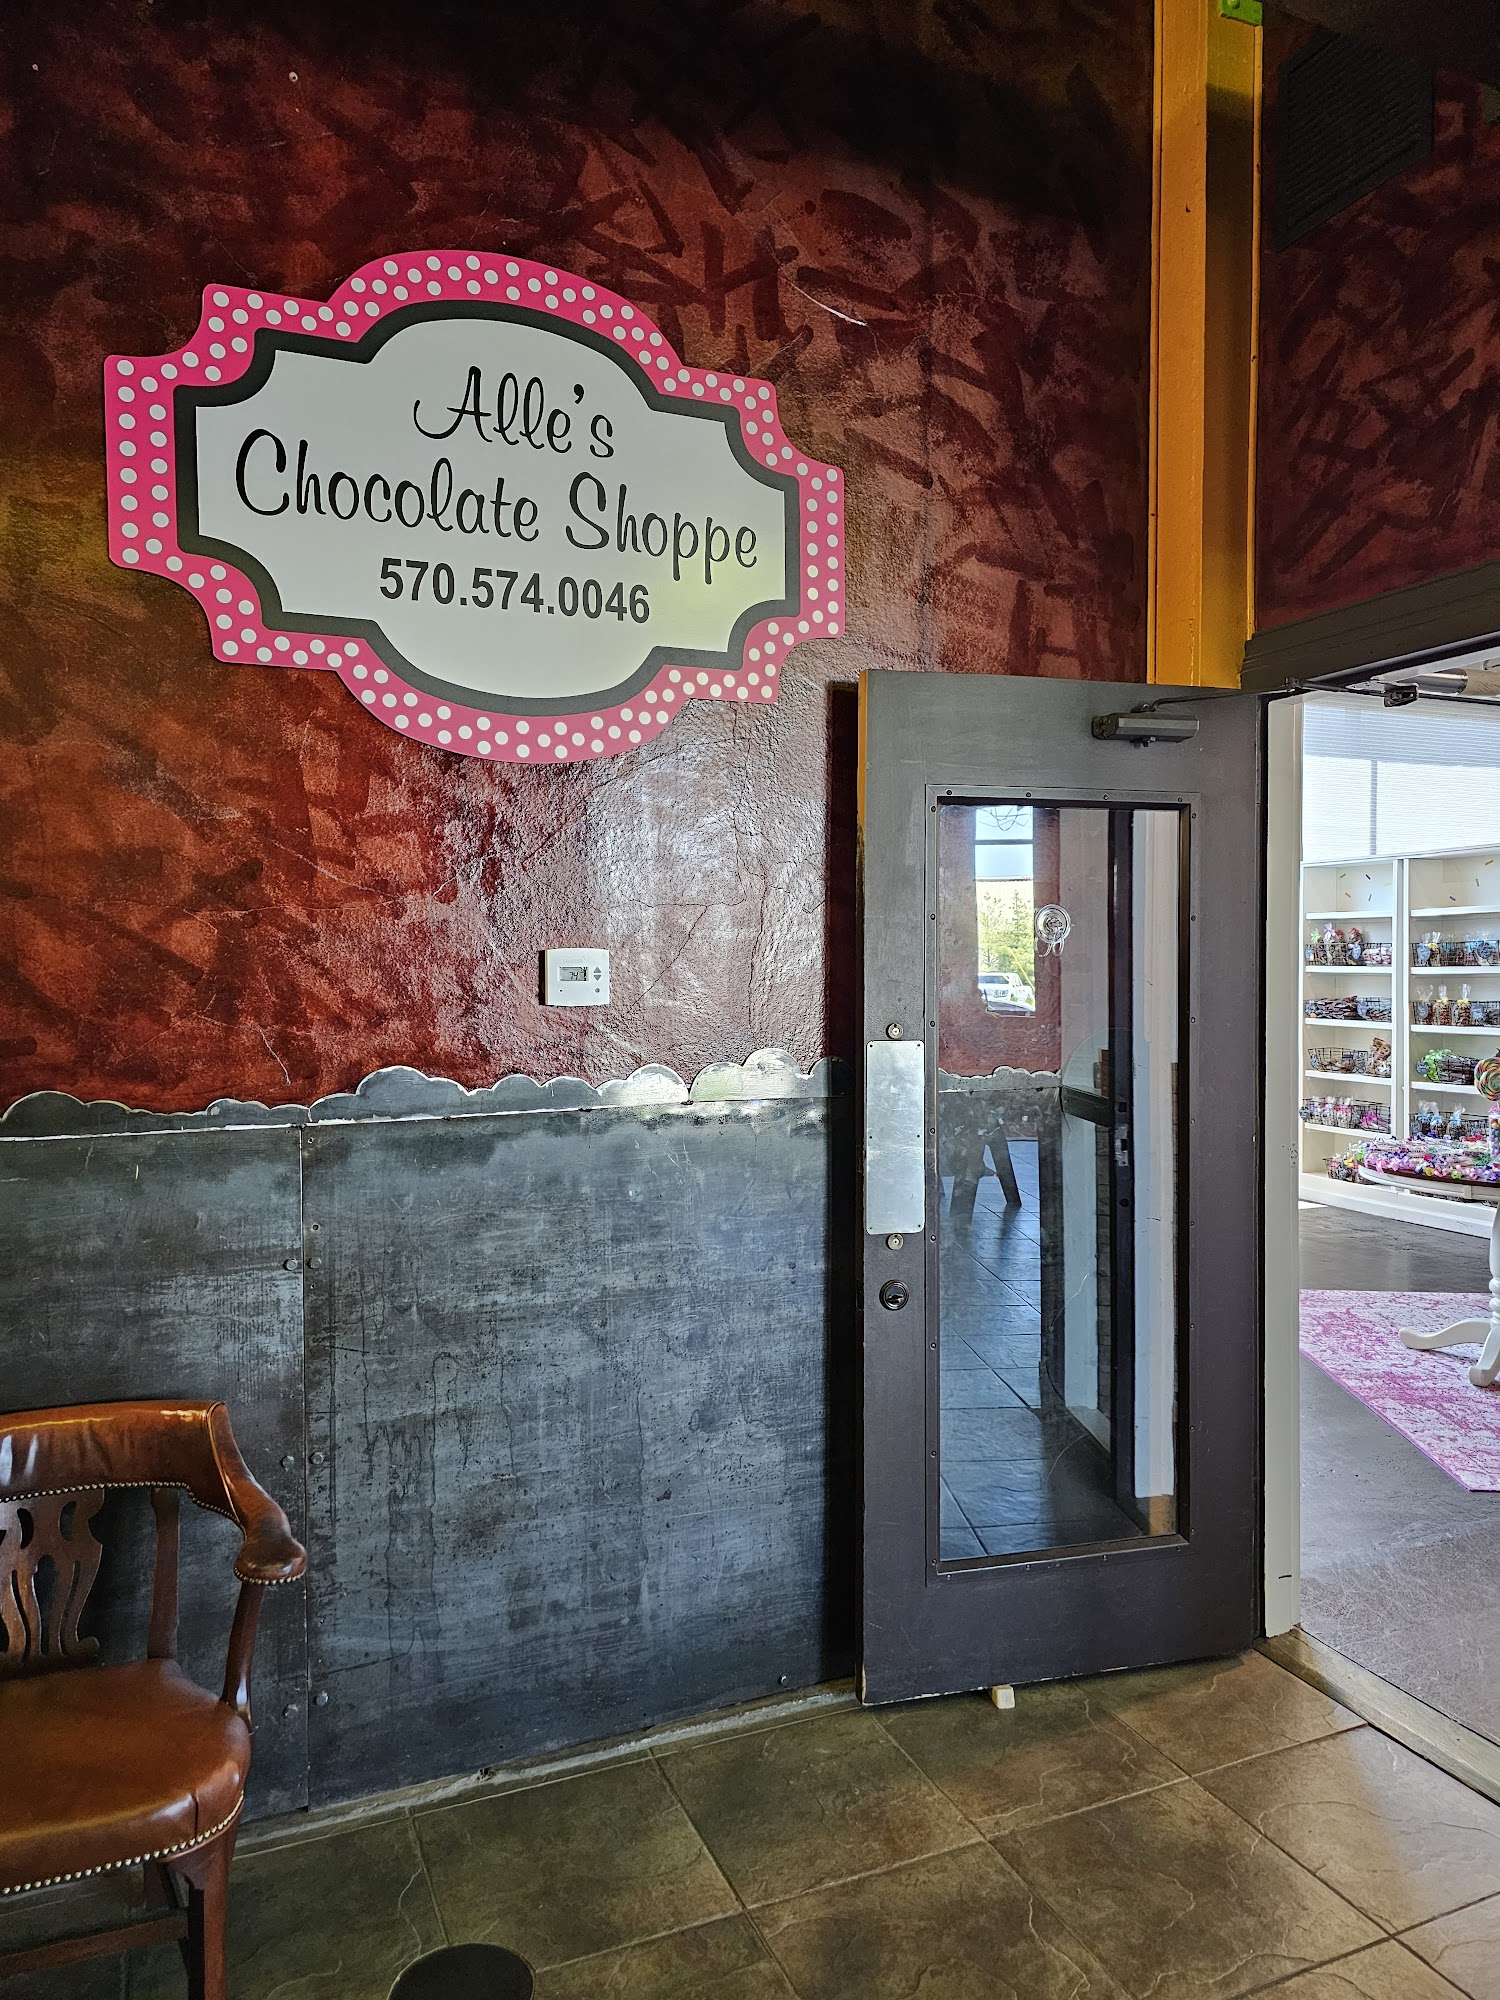 Alle’s Chocolate Shoppe